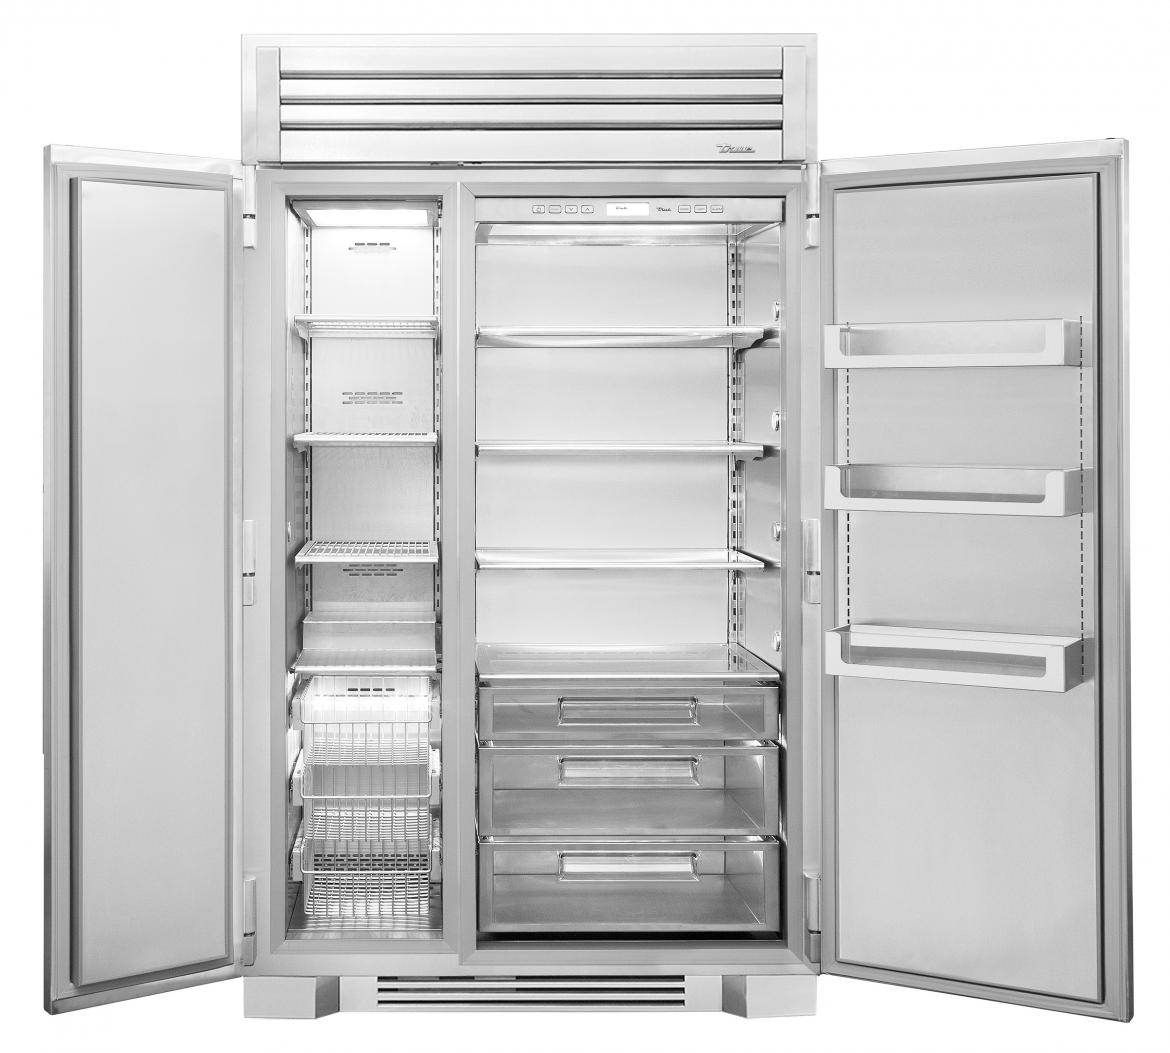 This 48-inch side-by-side refrigerator is the newest addition to True Residential's commercial-style products. Featuring a stainless steel exterior and interior, it offers soft-close hinges. Dual compressors and evaporators prevent odor and moisture transfer between compartments.